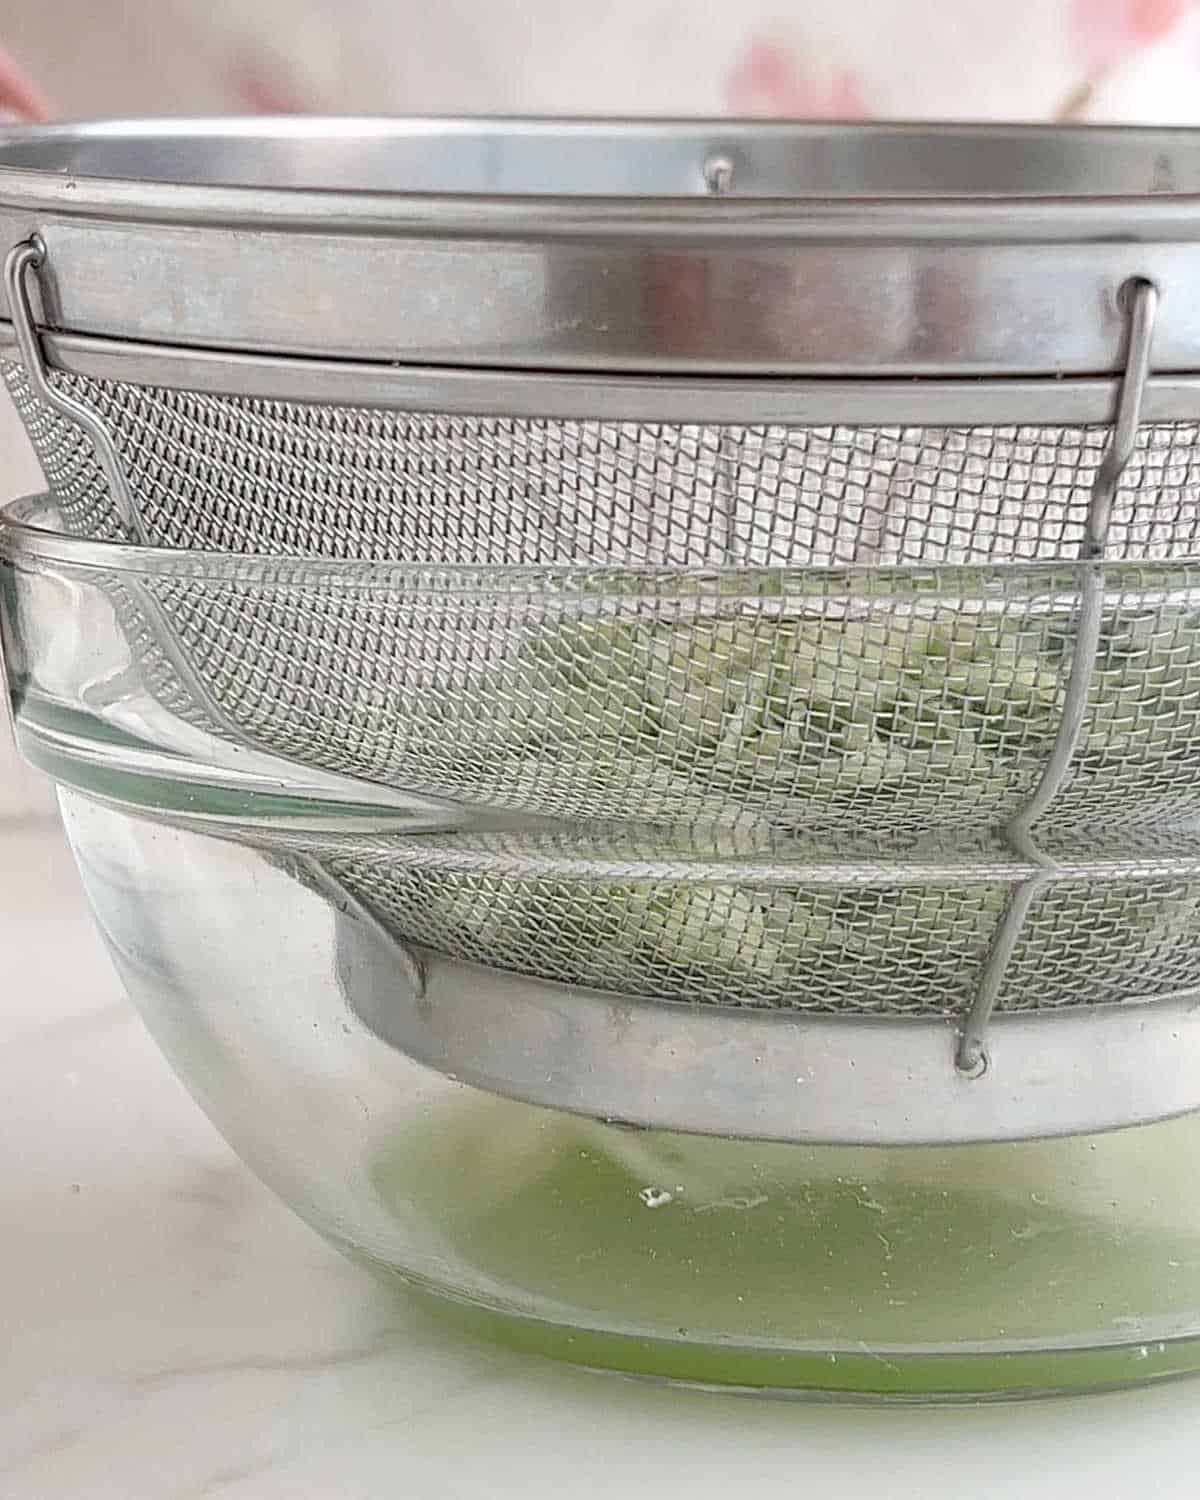 Grated cucumber draining in a metal colander set on a glass bowl.